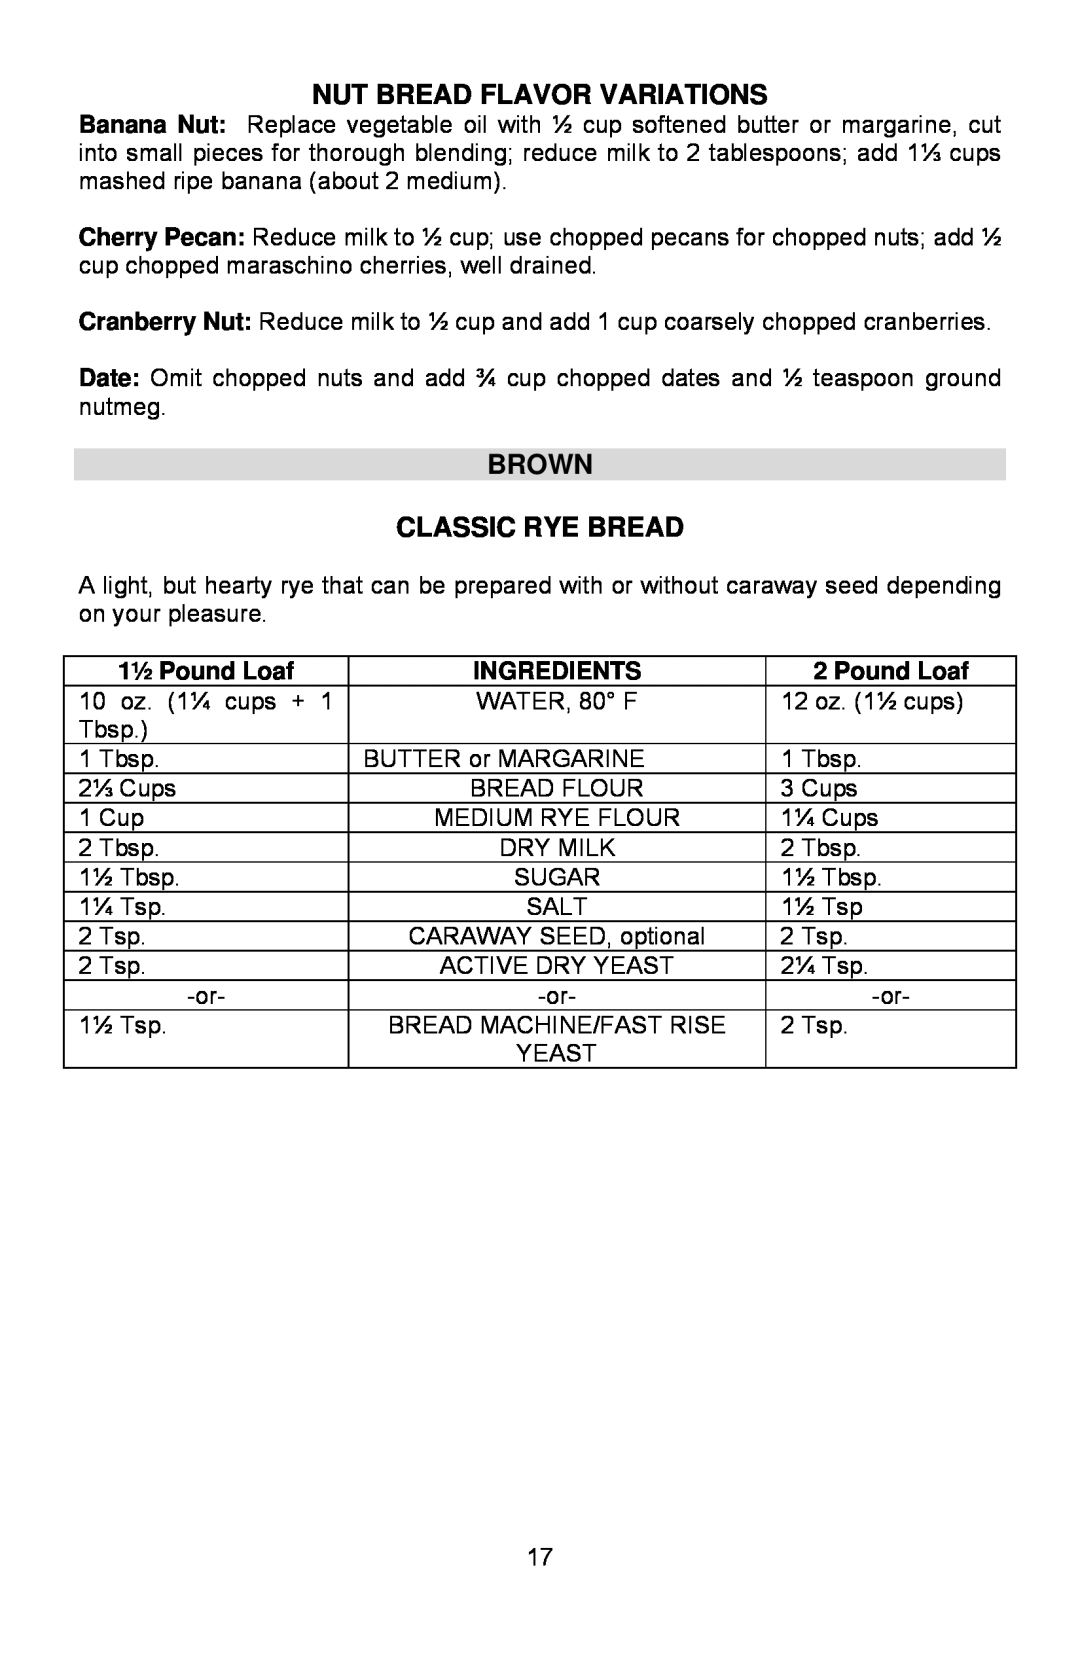 West Bend L5689A instruction manual Nut Bread Flavor Variations, Brown Classic Rye Bread, 1½ Pound Loaf, Ingredients 